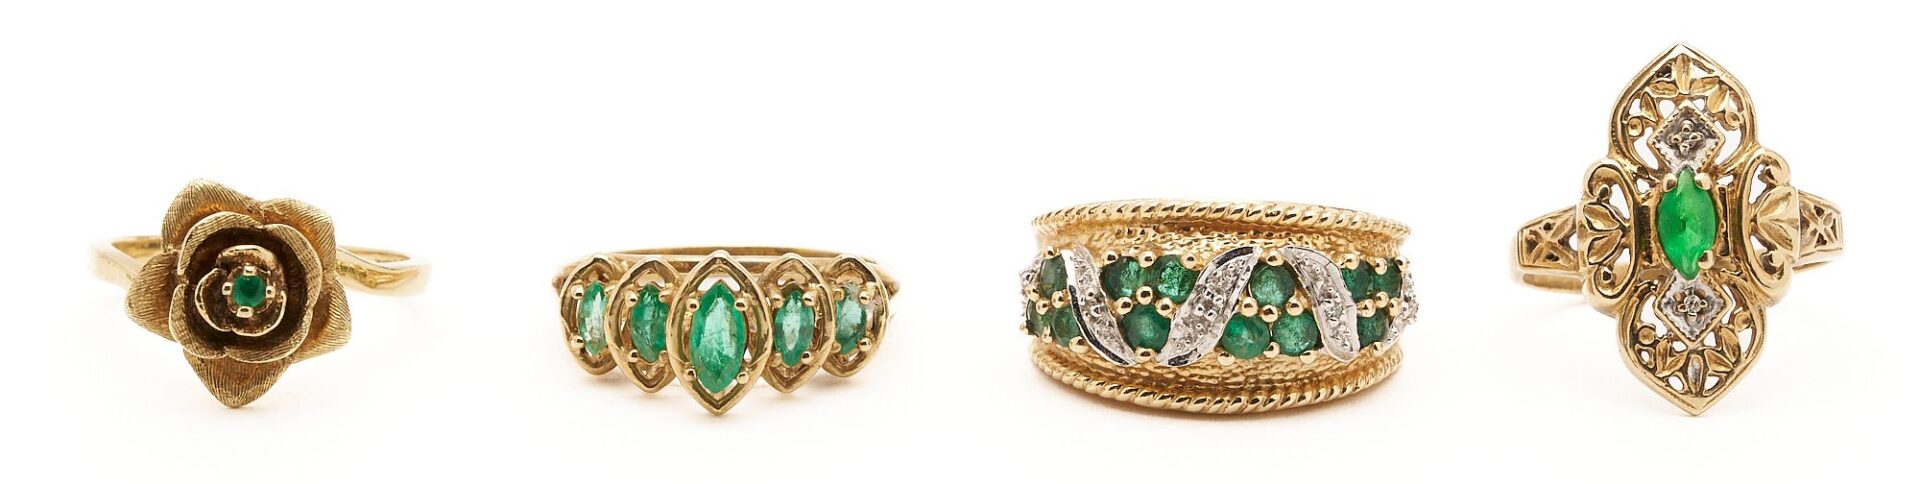 Lot 860: Four Gold and Green Gemstone Rings